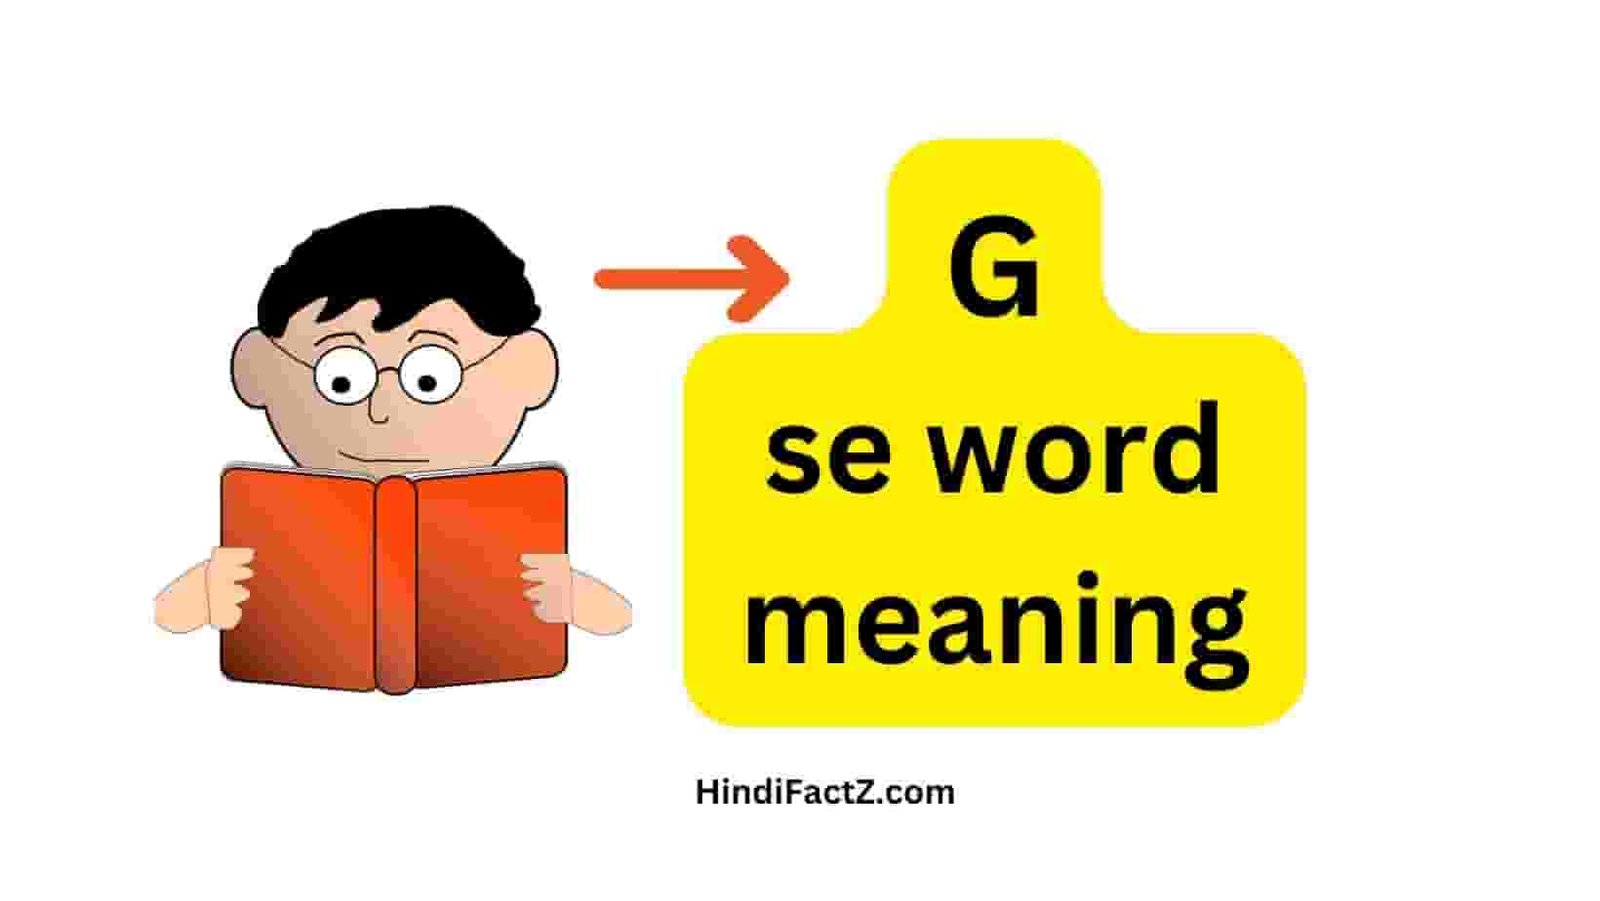 G se word meaning